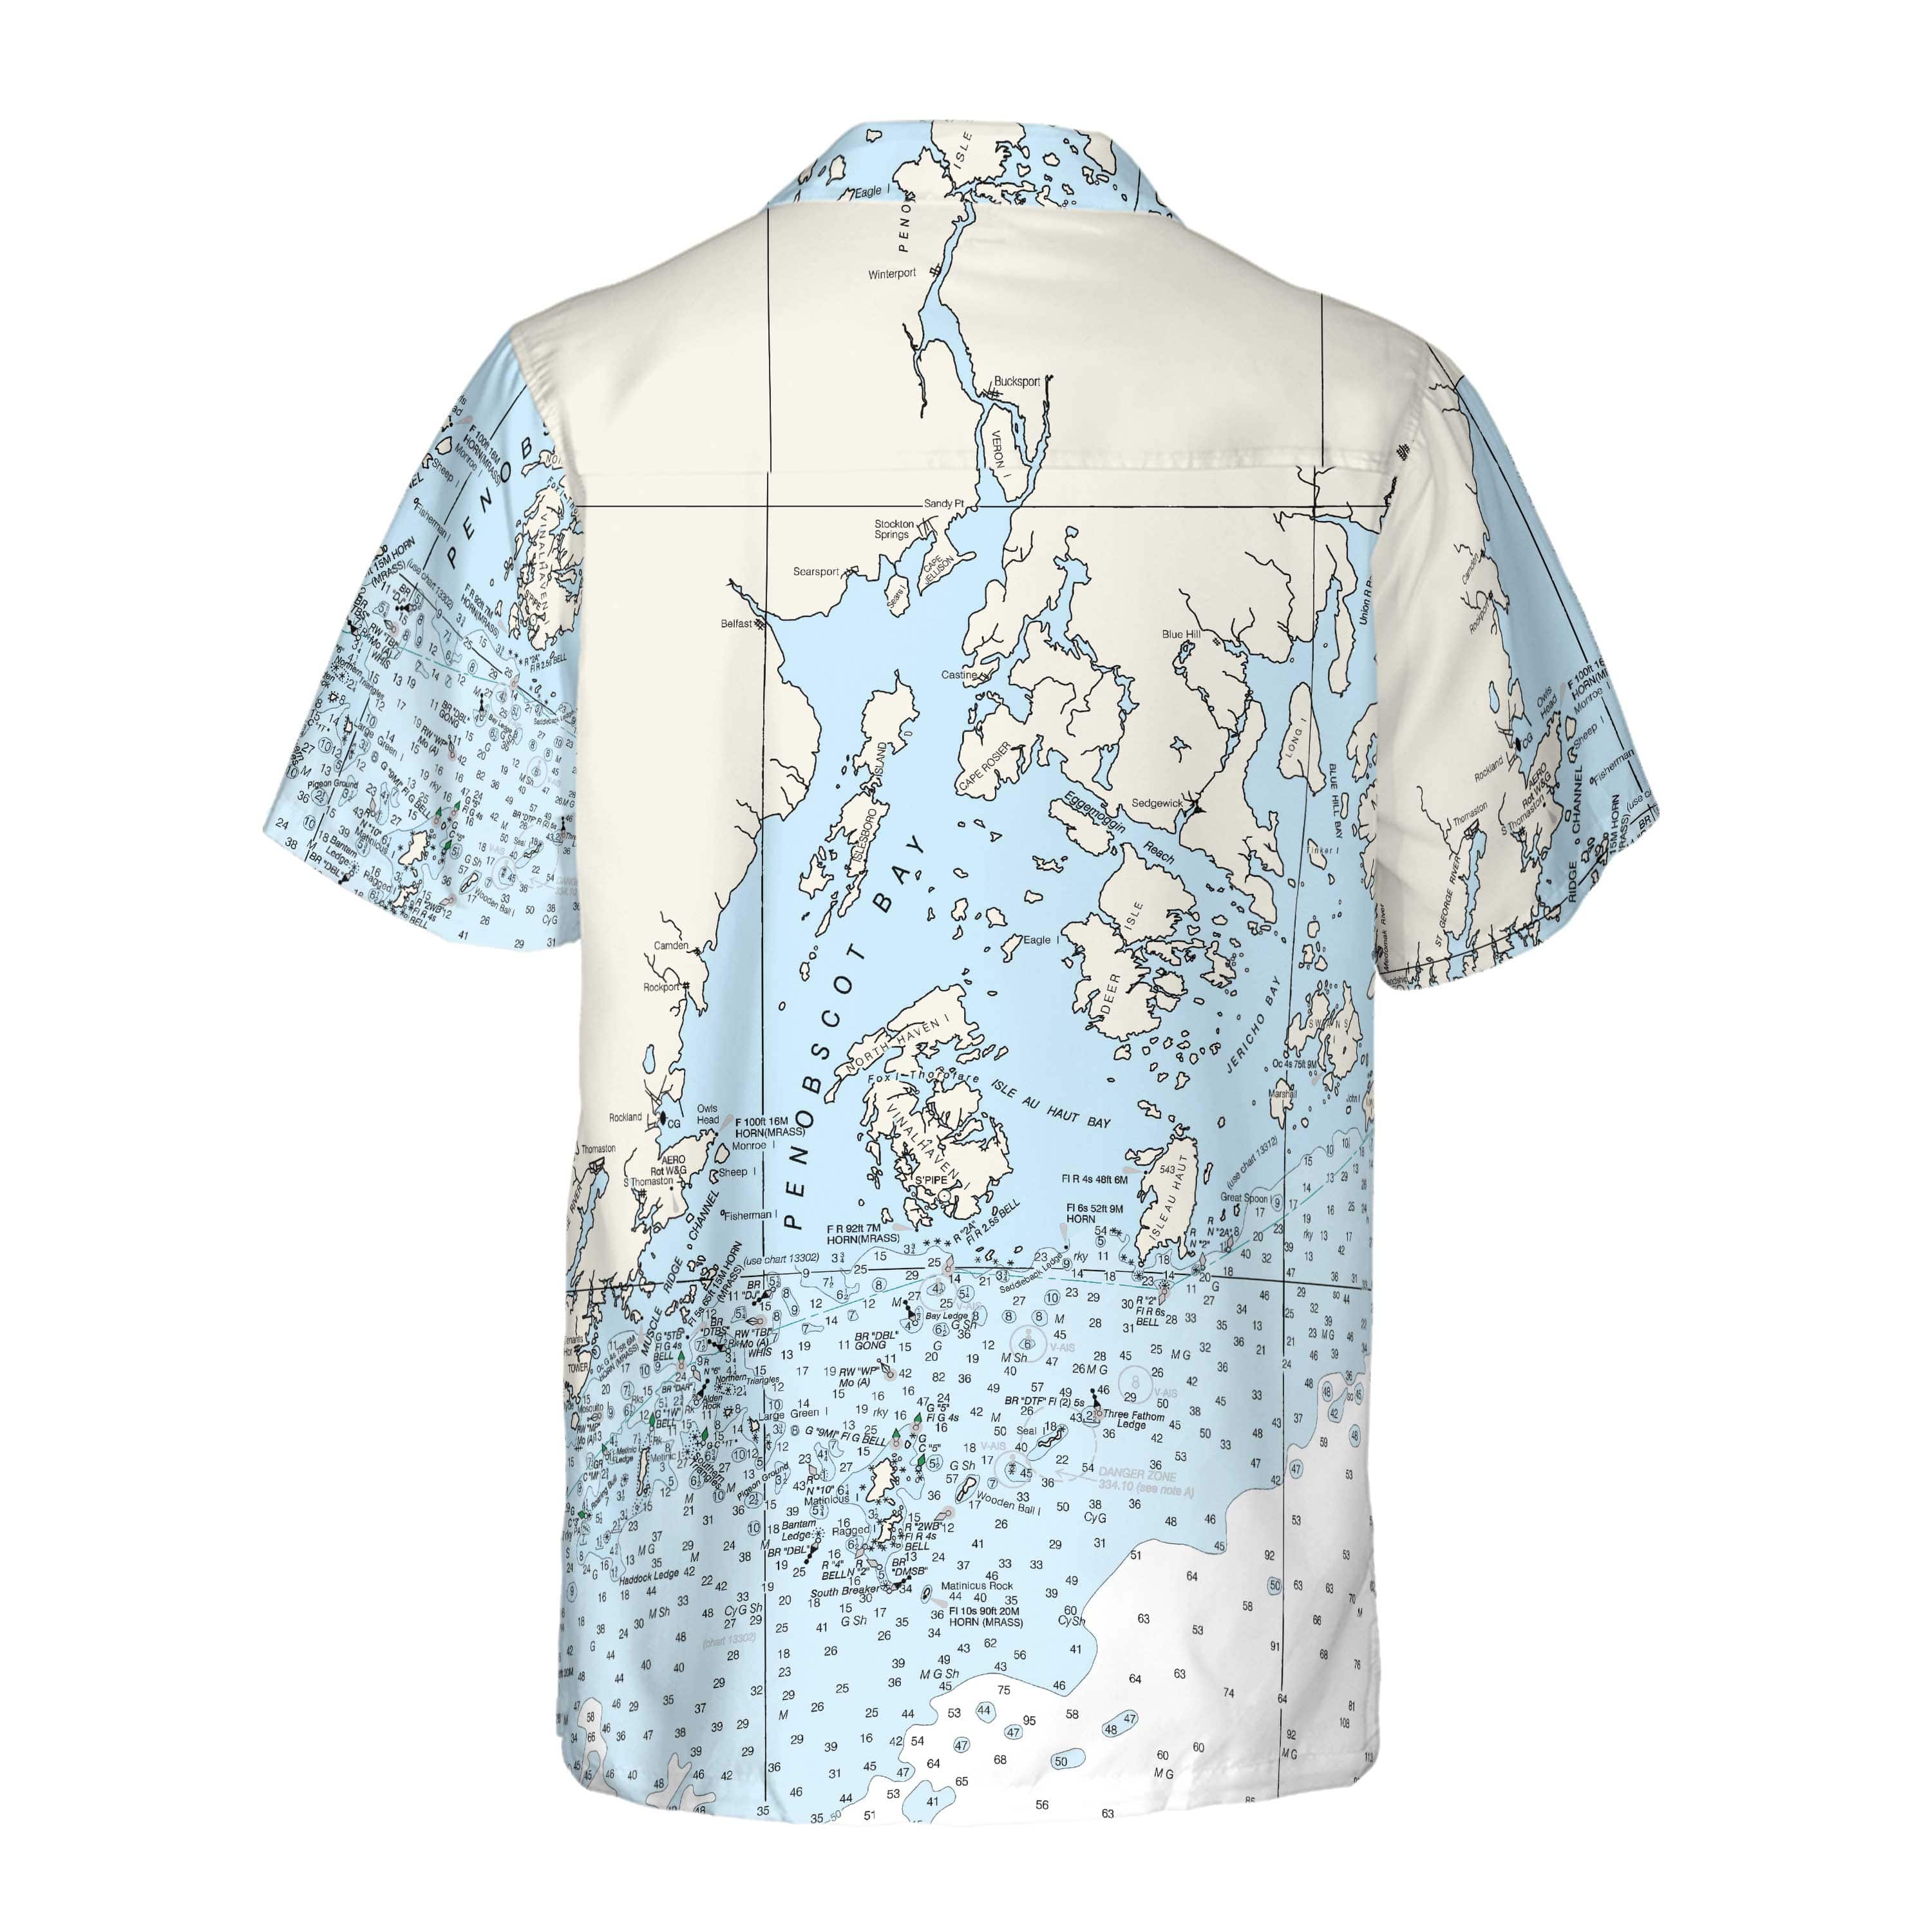 The Penobscot Bay Coconut Button Camp Shirt